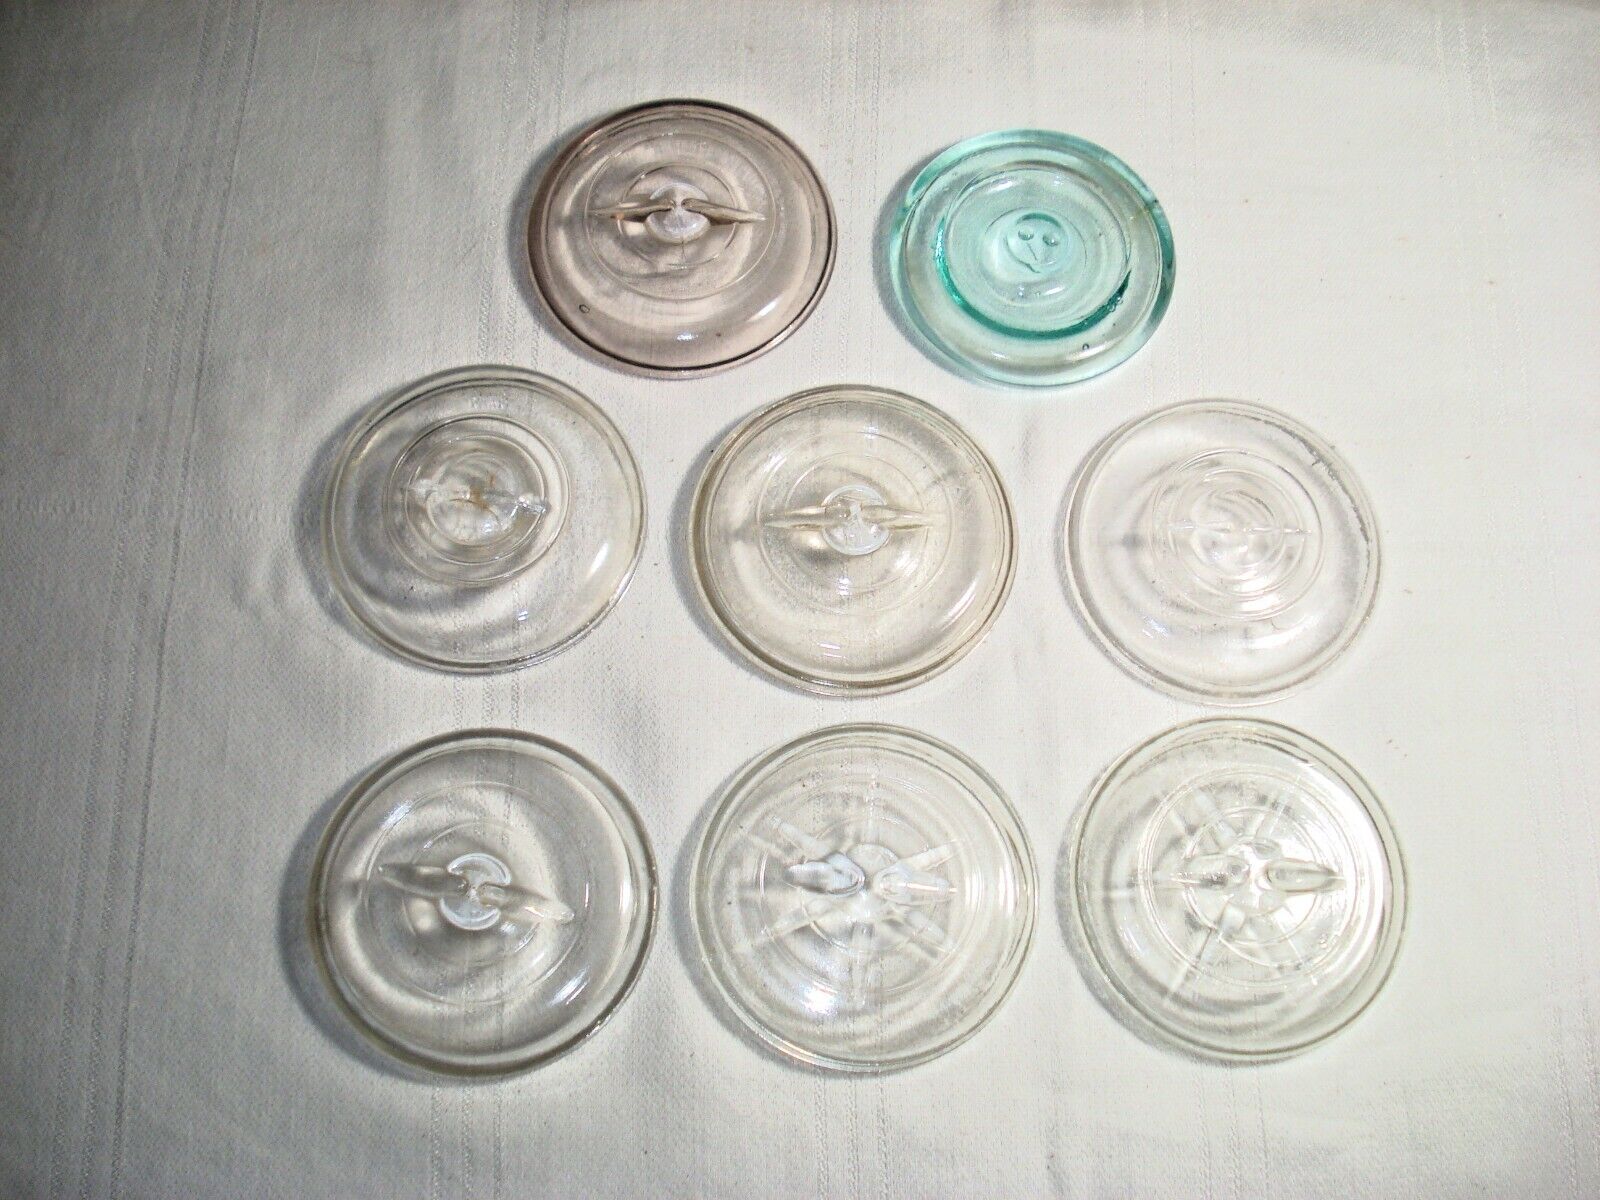 Lot of 8 Vintage Glass Jar Lids for Wire Bail Canning Mason Jars